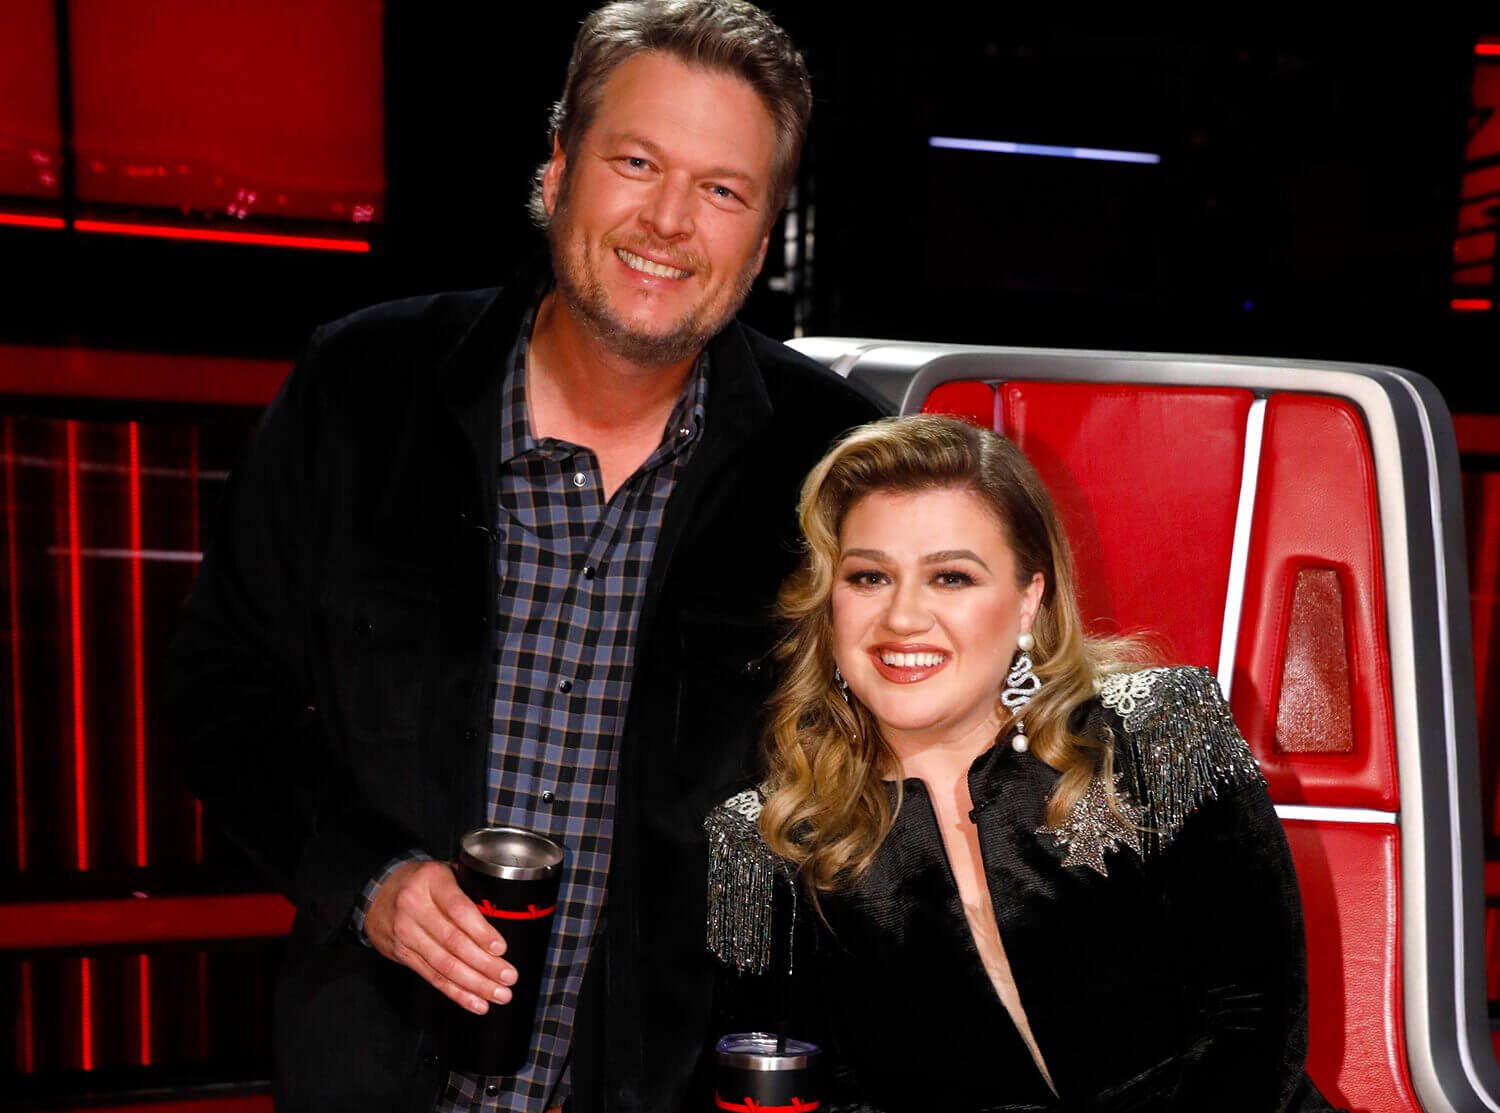 Kelly Clarkson: What It’s Really Like to Work with Blake Shelton on ‘The Voice’